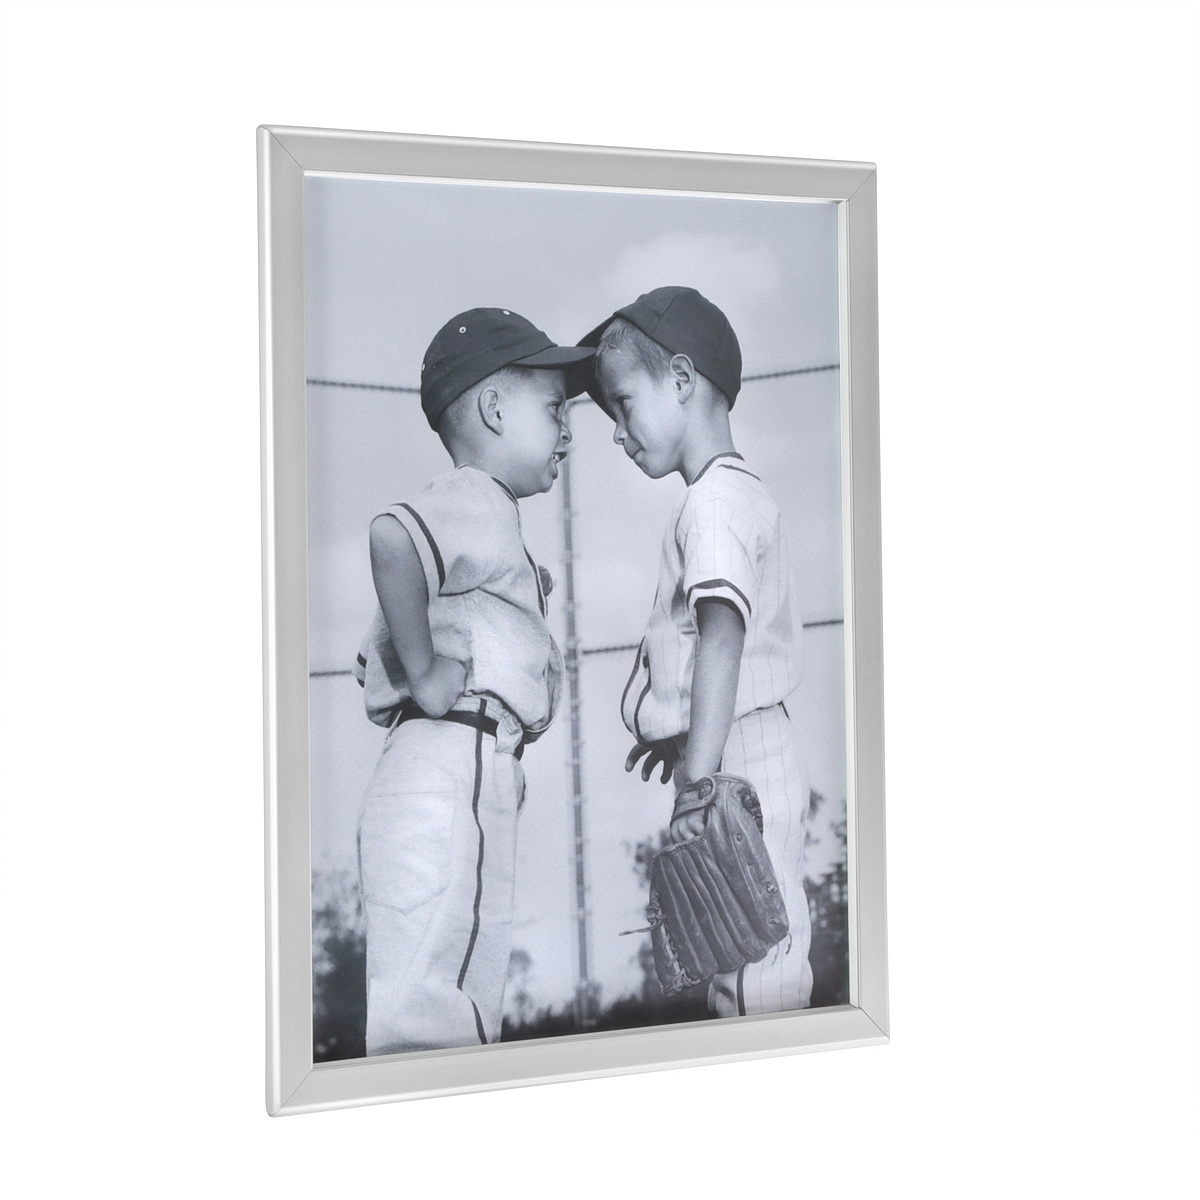 Aluminum Front Load Easy Snap Wall Poster Frame, Silver, 1.25'' profile, 11''x17''